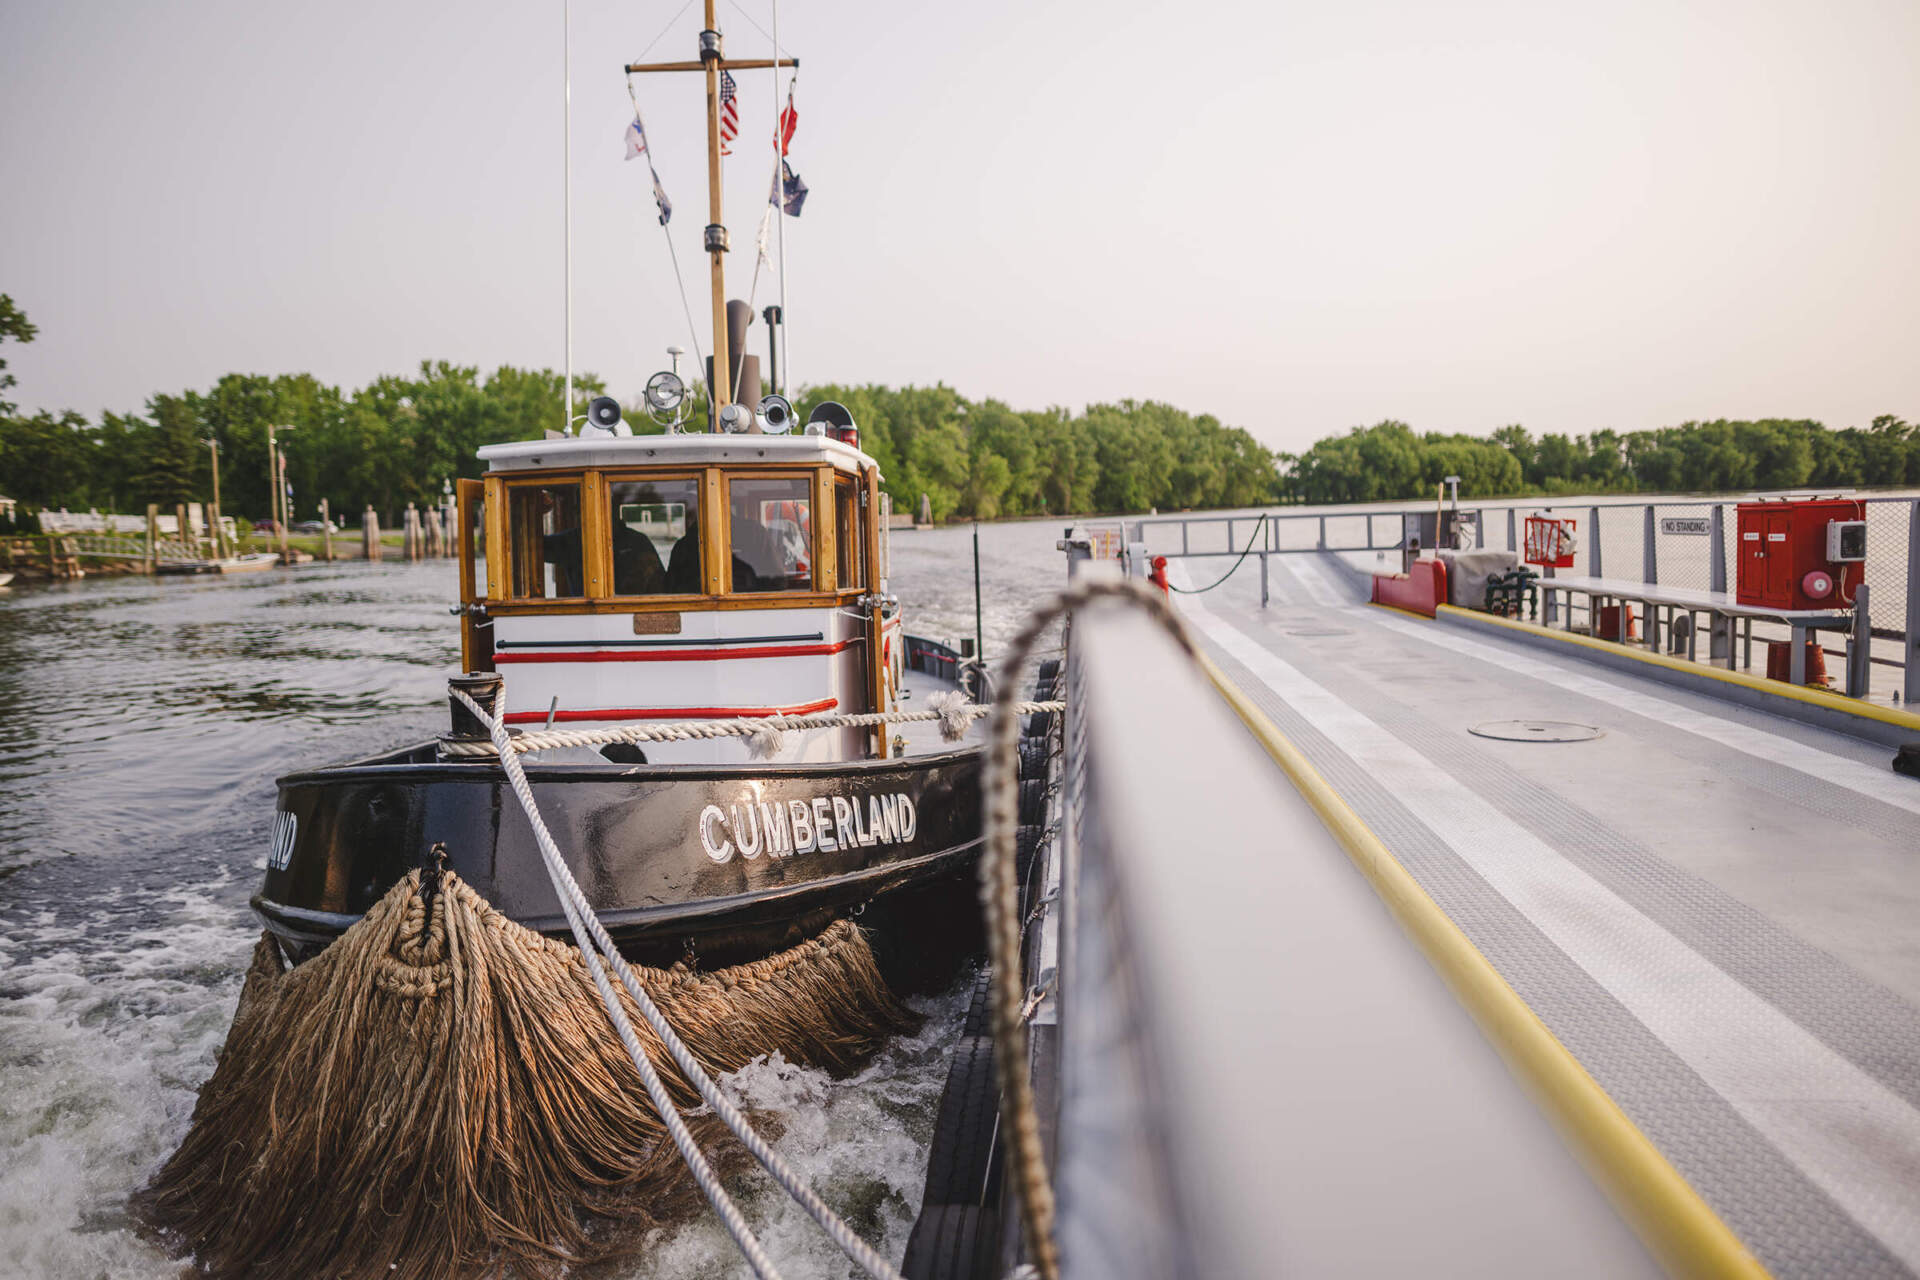 The CT DOT ferry between Rocky Hill and Glastonbury reopened for the season this month after a several-week delay due to river conditions. (Tony Spinelli/Connecticut Public)